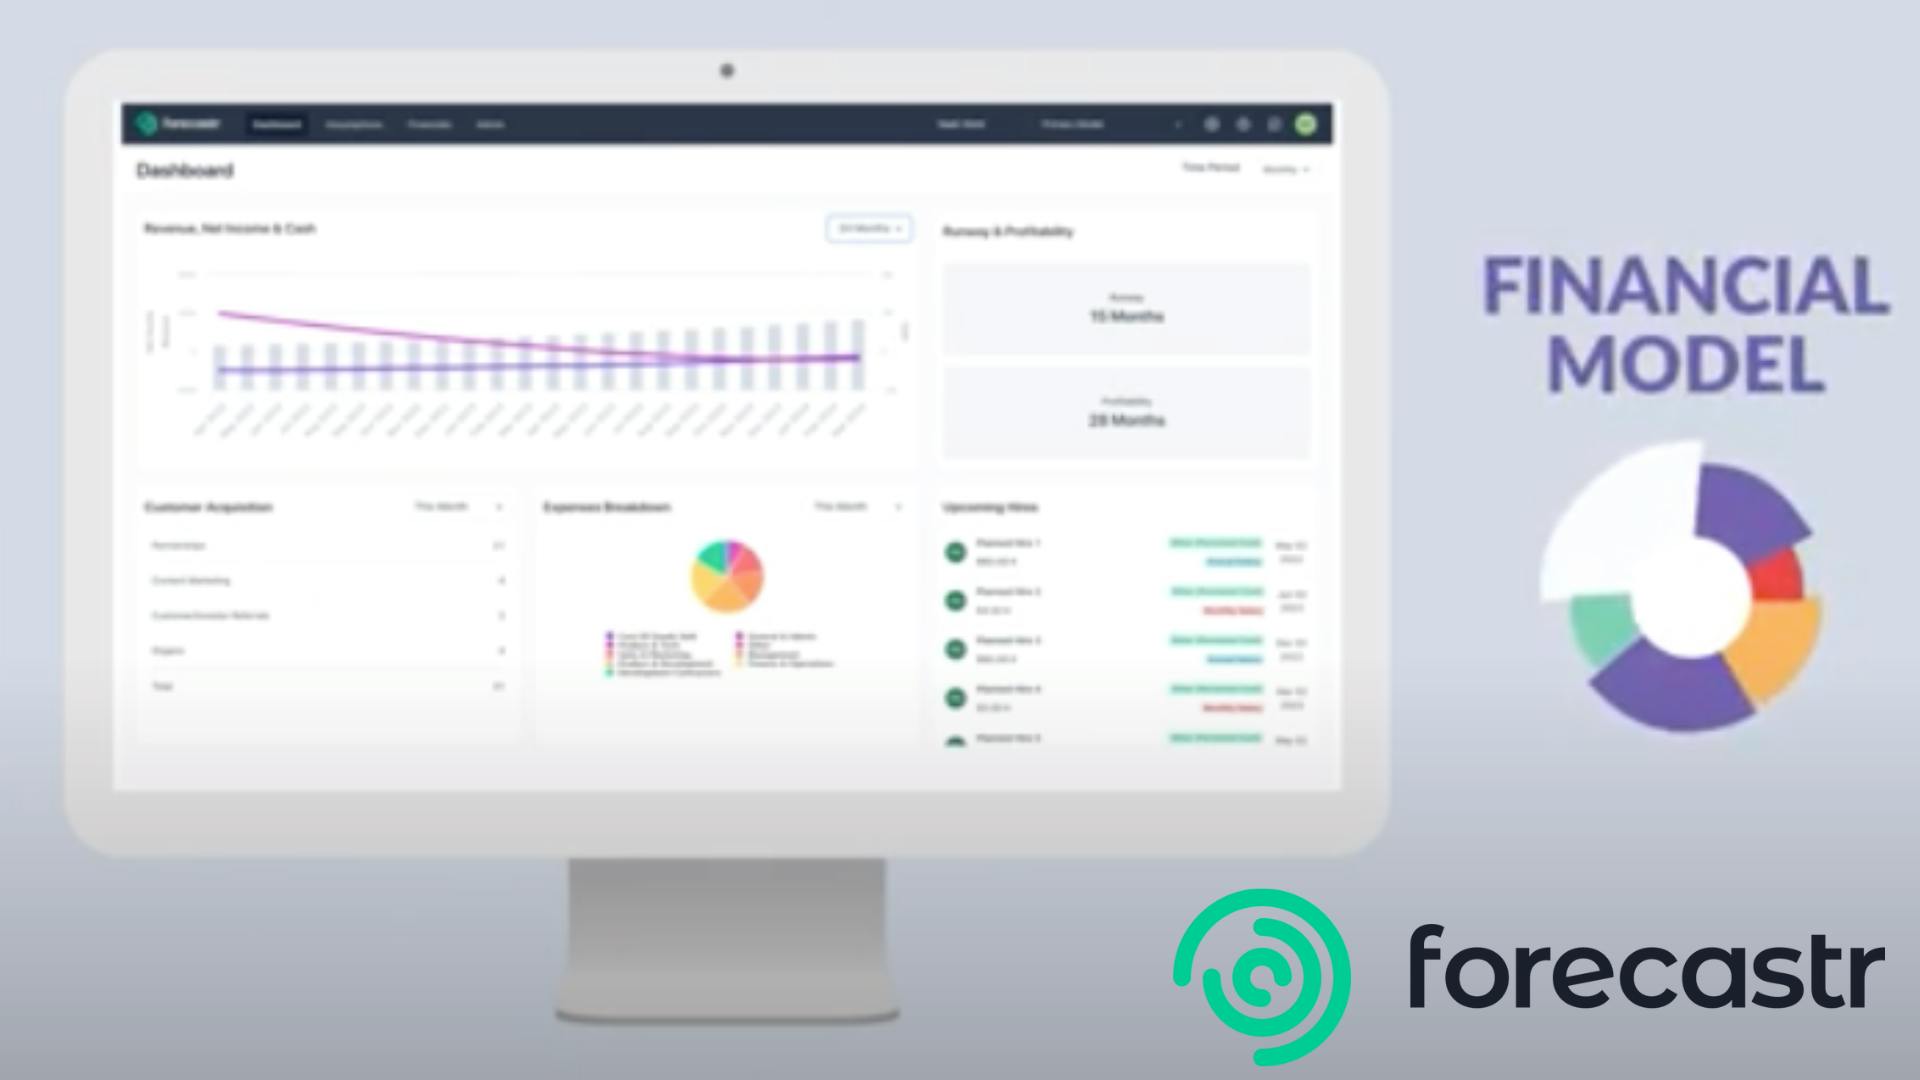 Image of forecastr's financial modeling dashboard for startup companies